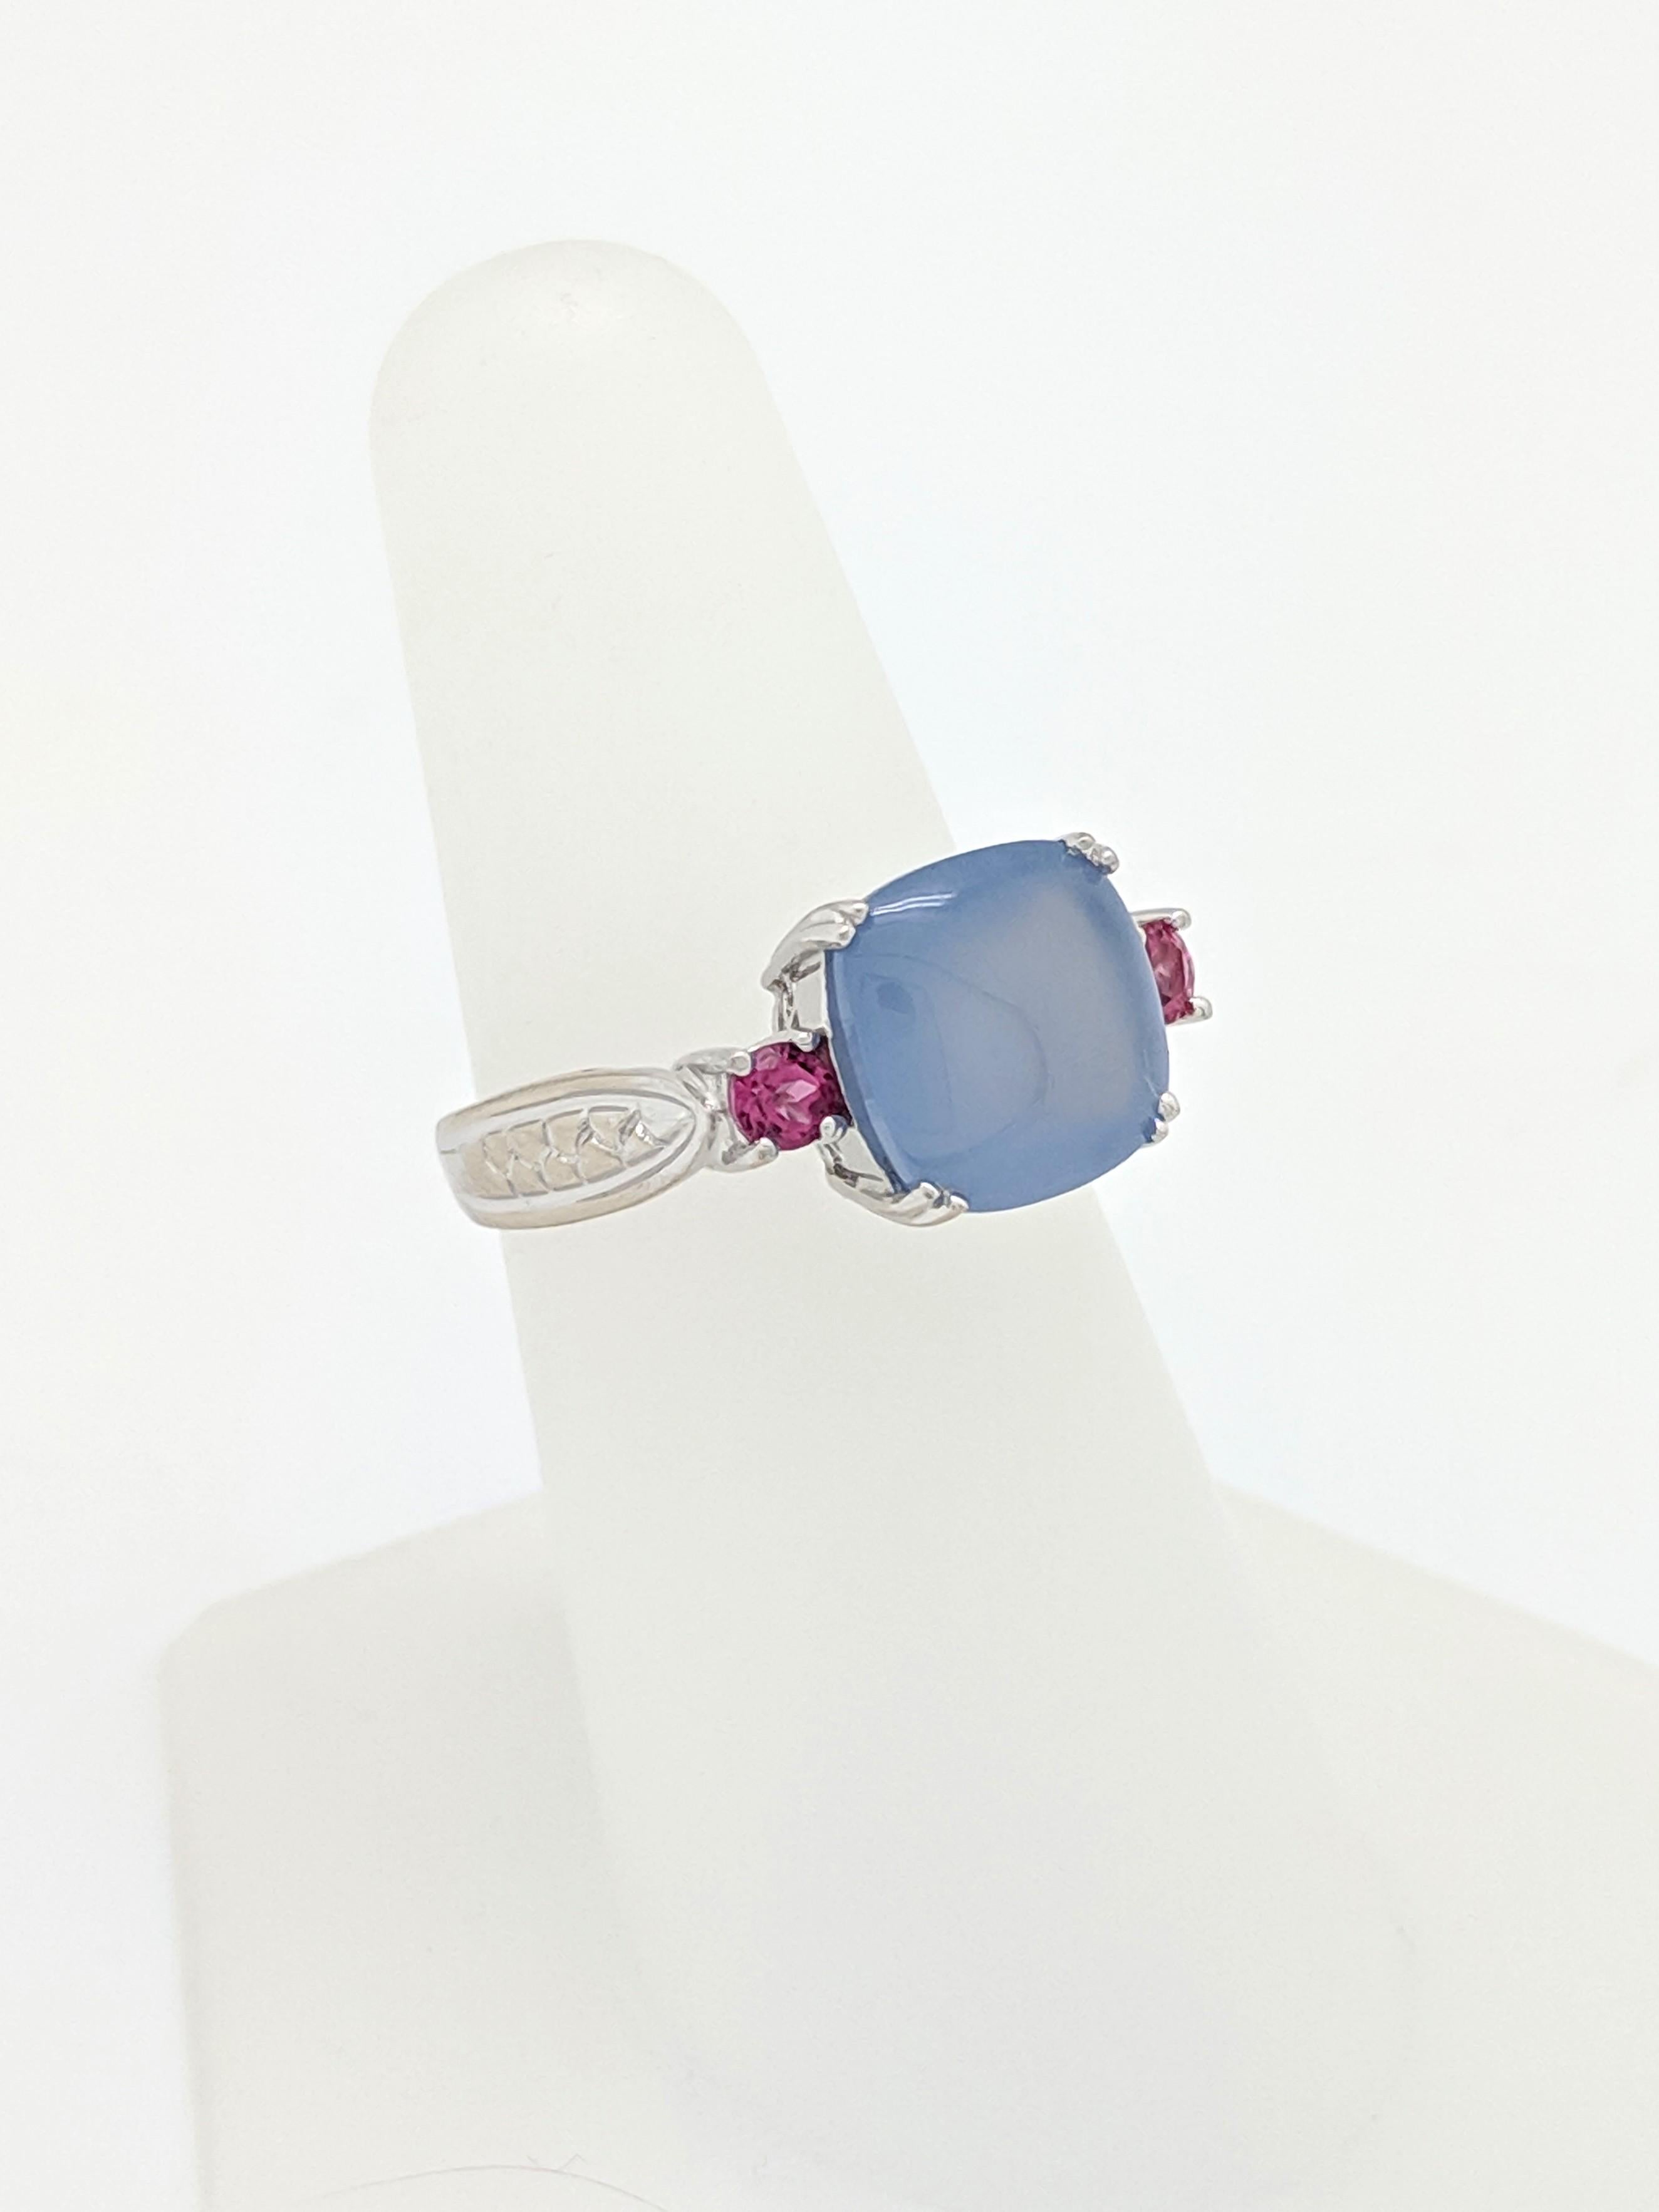 14 Karat White Gold Cabochon Cut Purple Jade and Pink Tourmaline Ring In Good Condition For Sale In Gainesville, FL